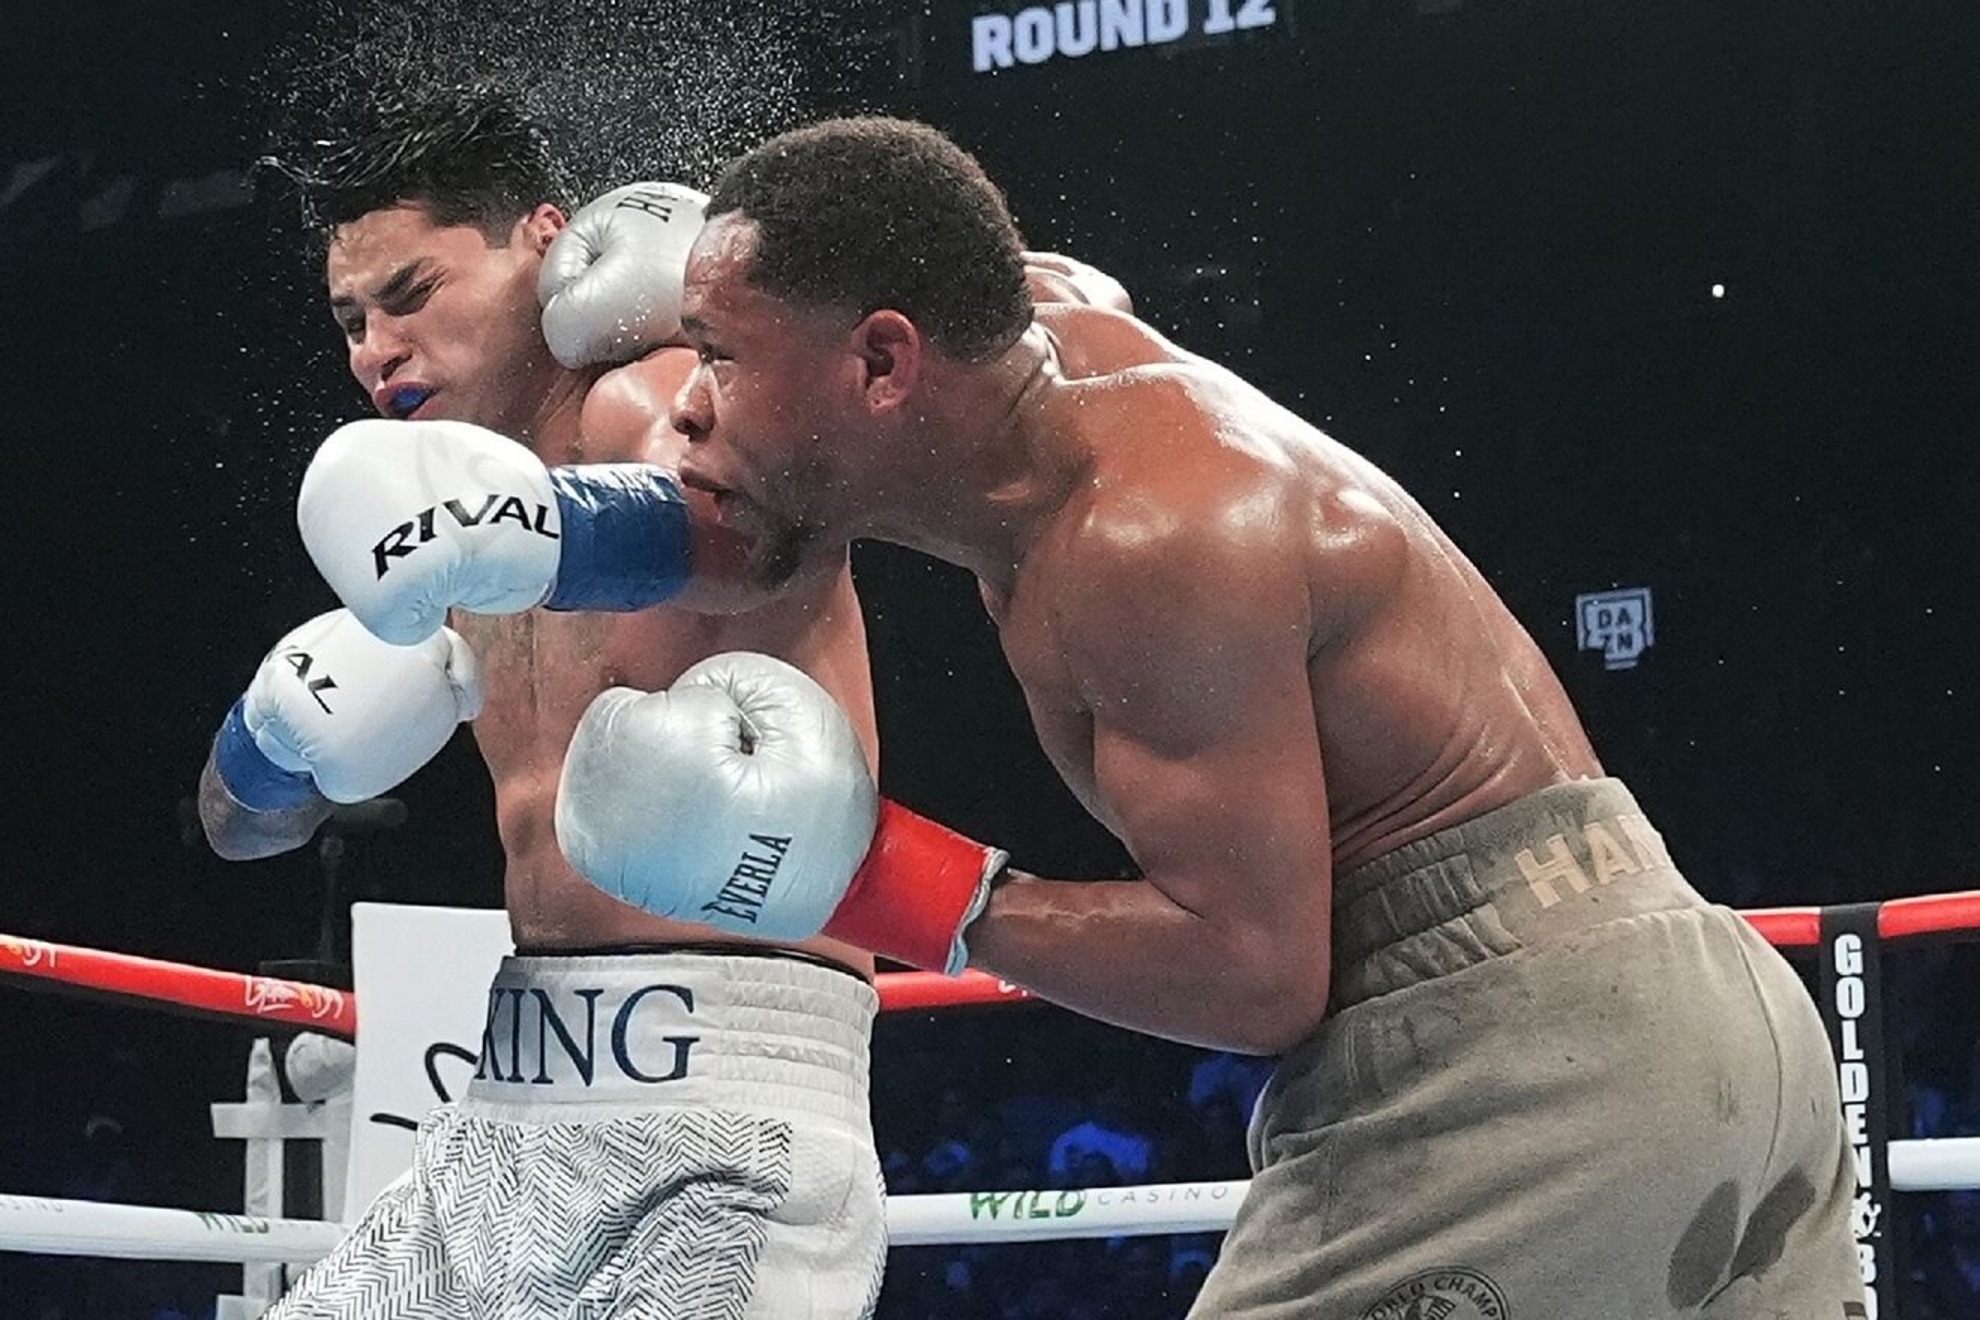 Devin Haney is no longer undefeated after losing to Ryan Garcia